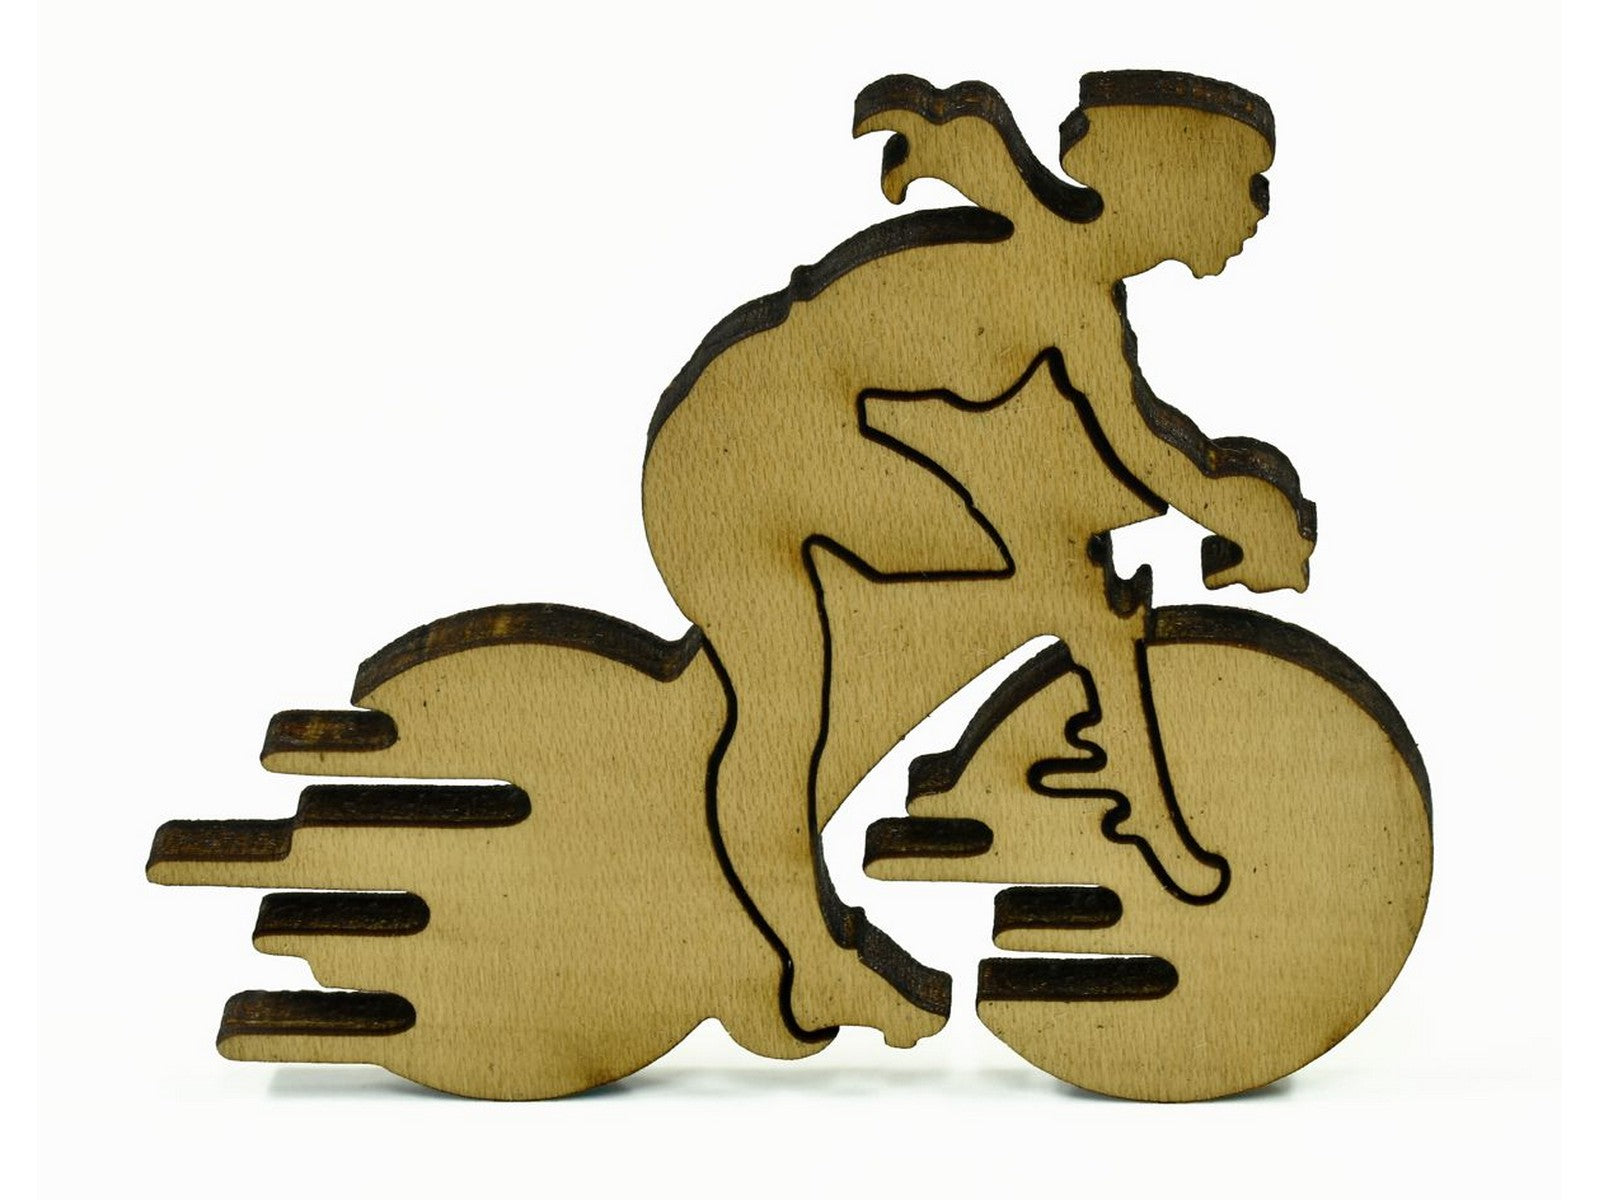 A closeup of pieces in the shape of a person riding a bicycle.